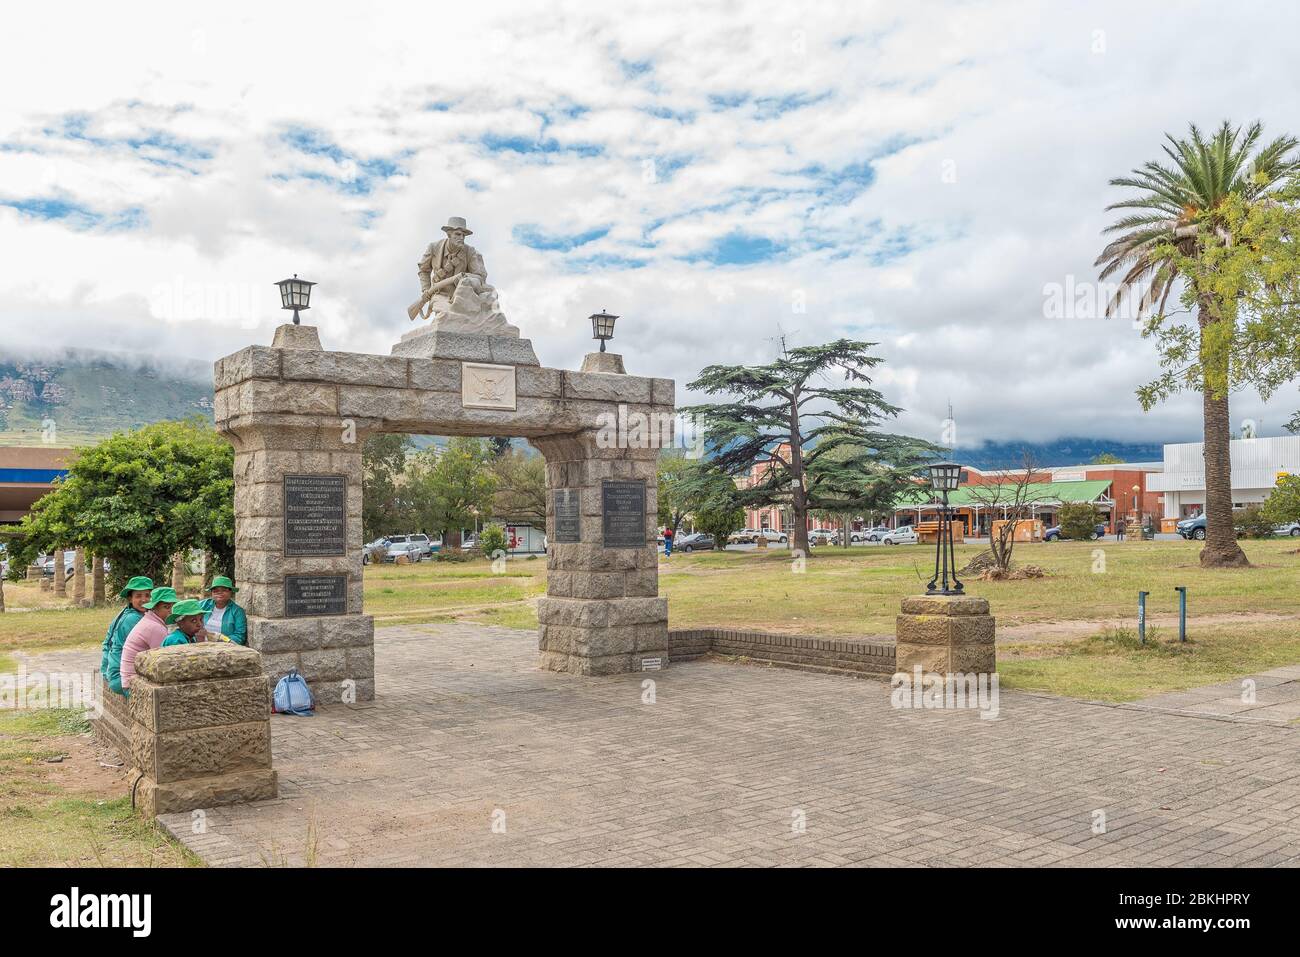 HARRISMITH, SOUTH AFRICA - MARCH 16, 2020:  A street scene, with a monument commemorating locals who died in the Boer War, in Harrismith. People are v Stock Photo